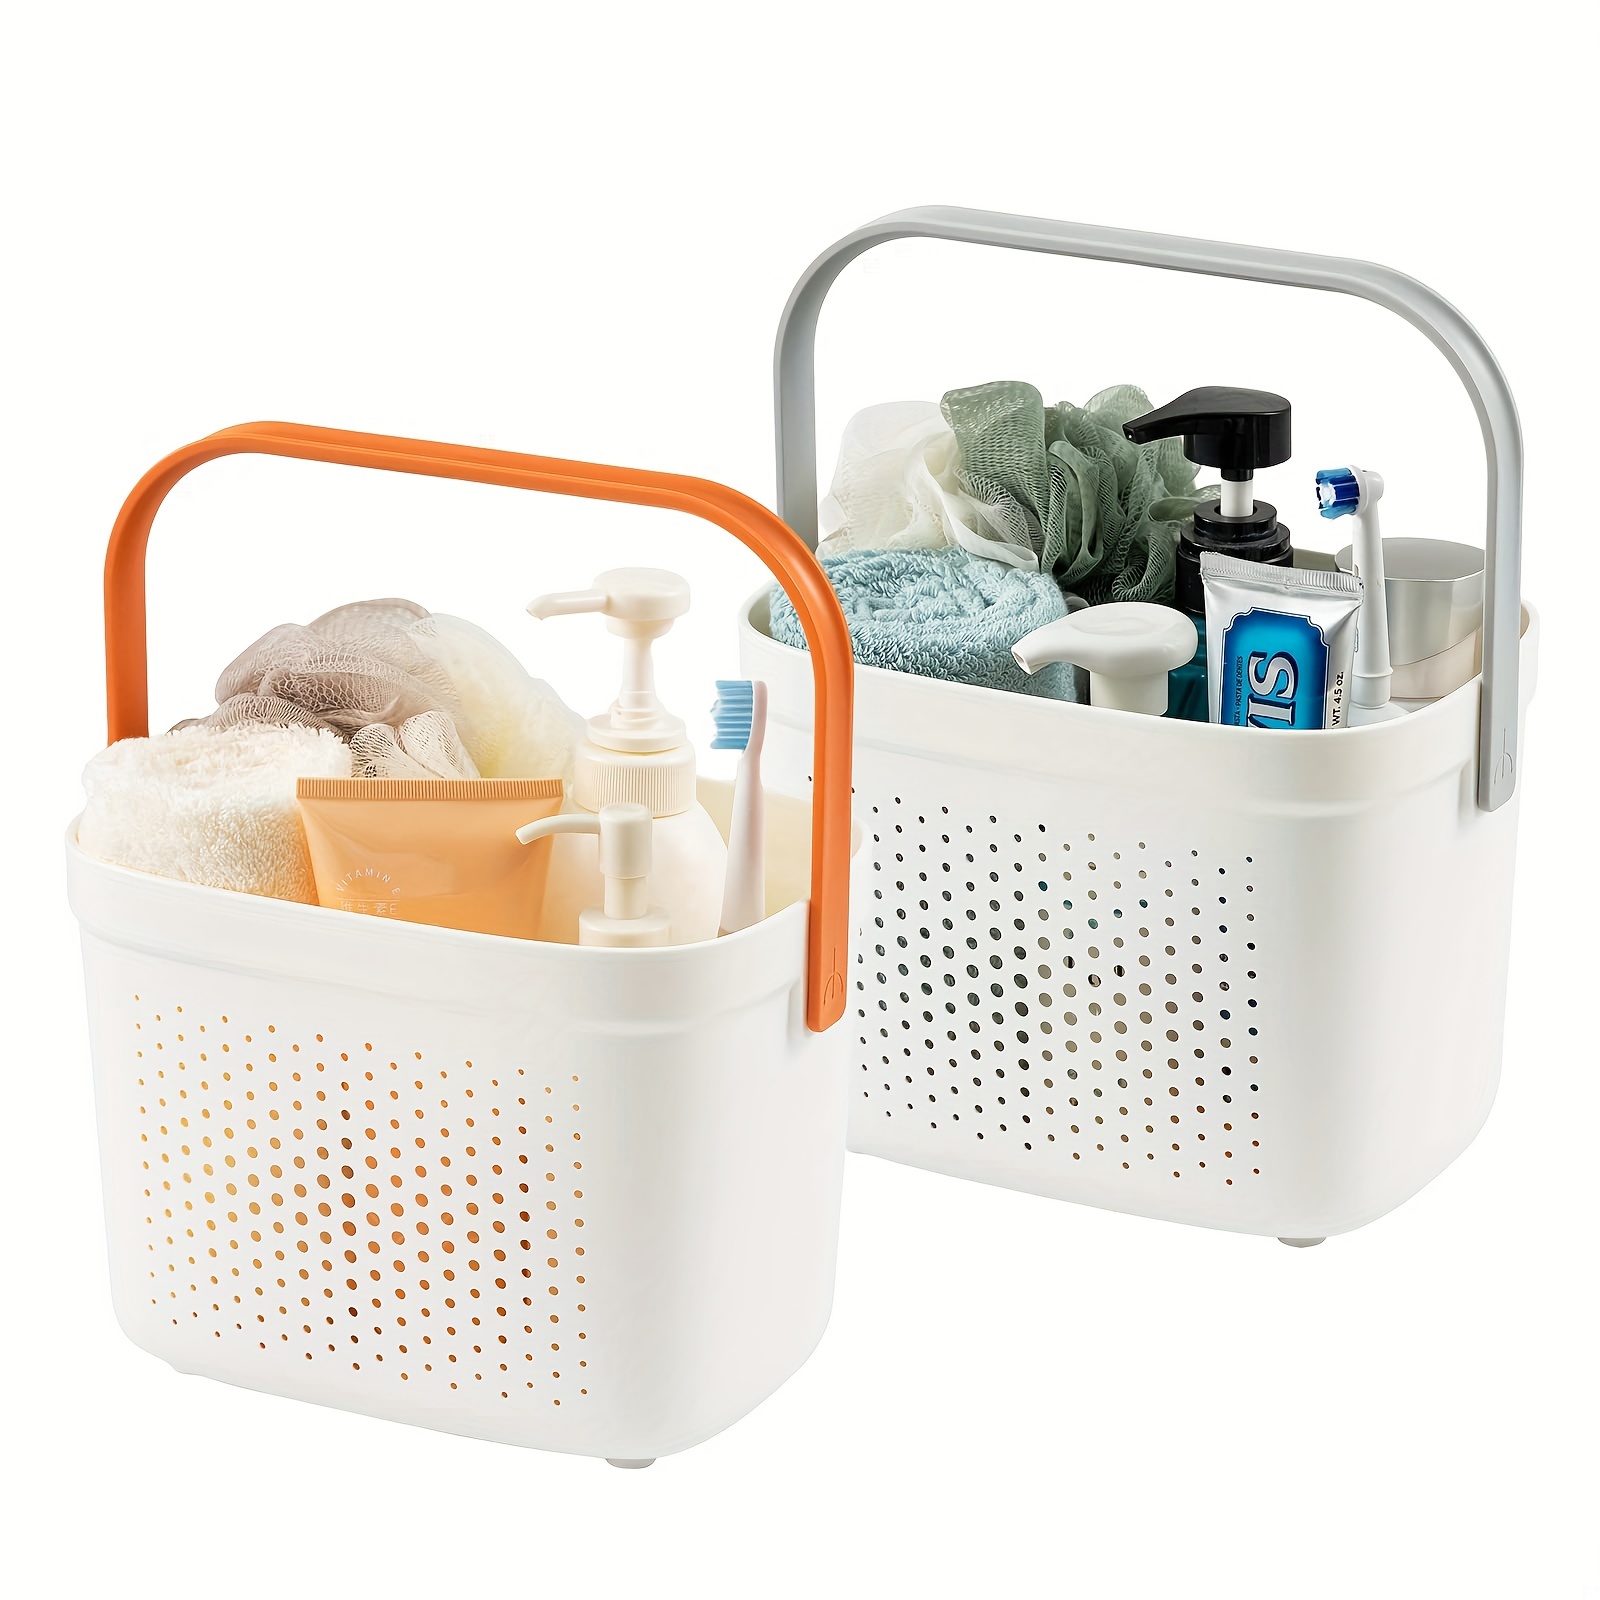 Haundry Large Cleaning Supplies Caddy with Handle, Plastic Storage Bucket  Organizer for Cleaning Products, Shower Caddy Basket for Car, Dorm